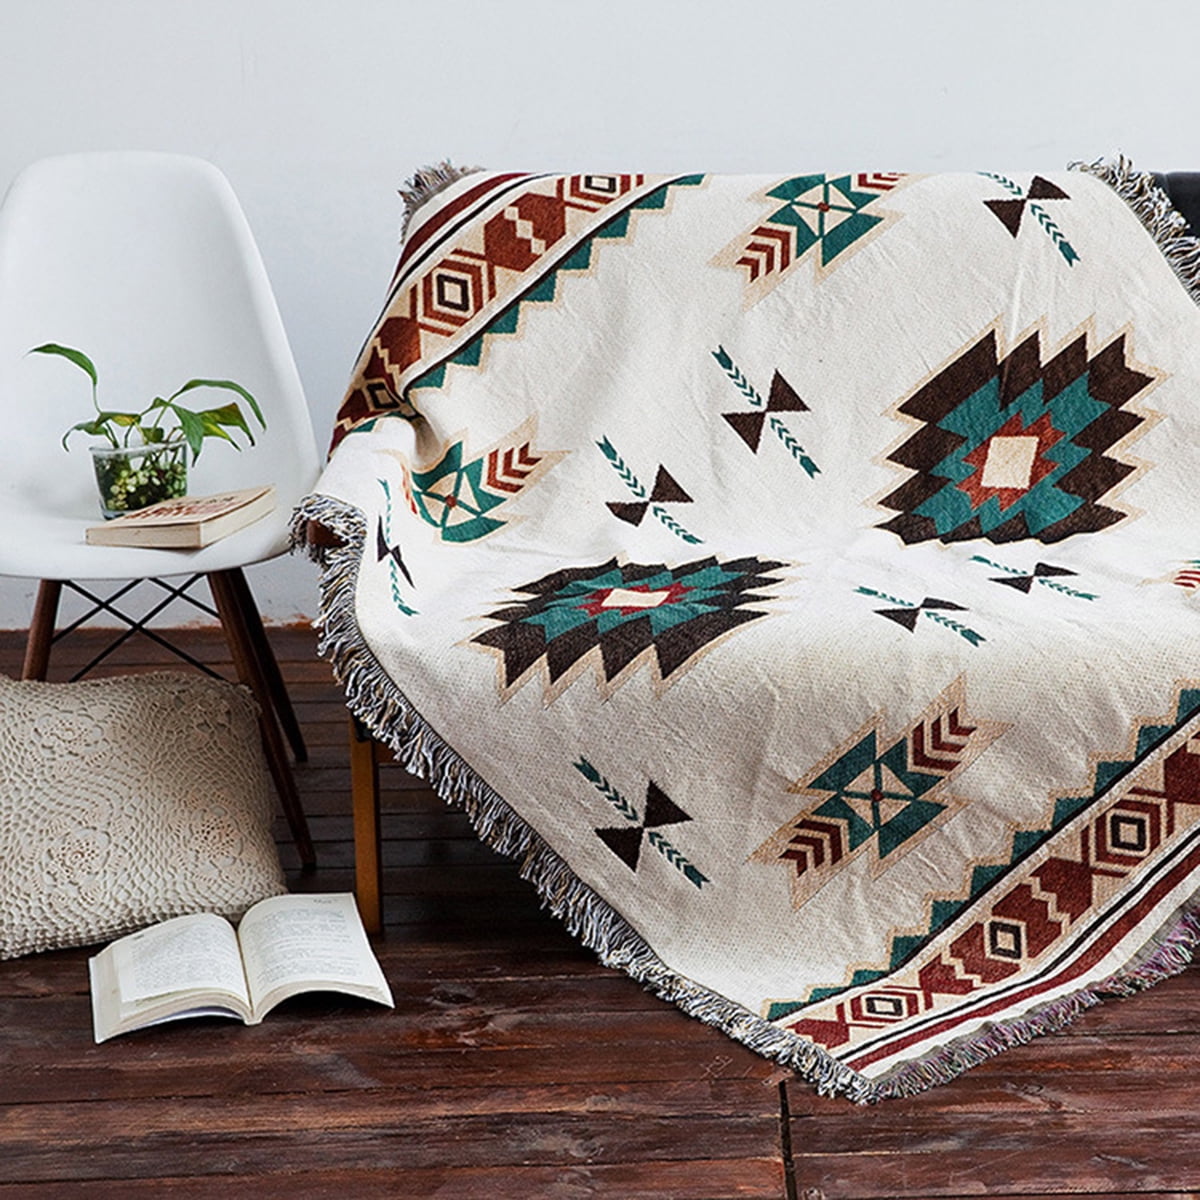 Rrea rugs tapestry AZTEC navajo throw blanket sofa cover home decor wall hanging 